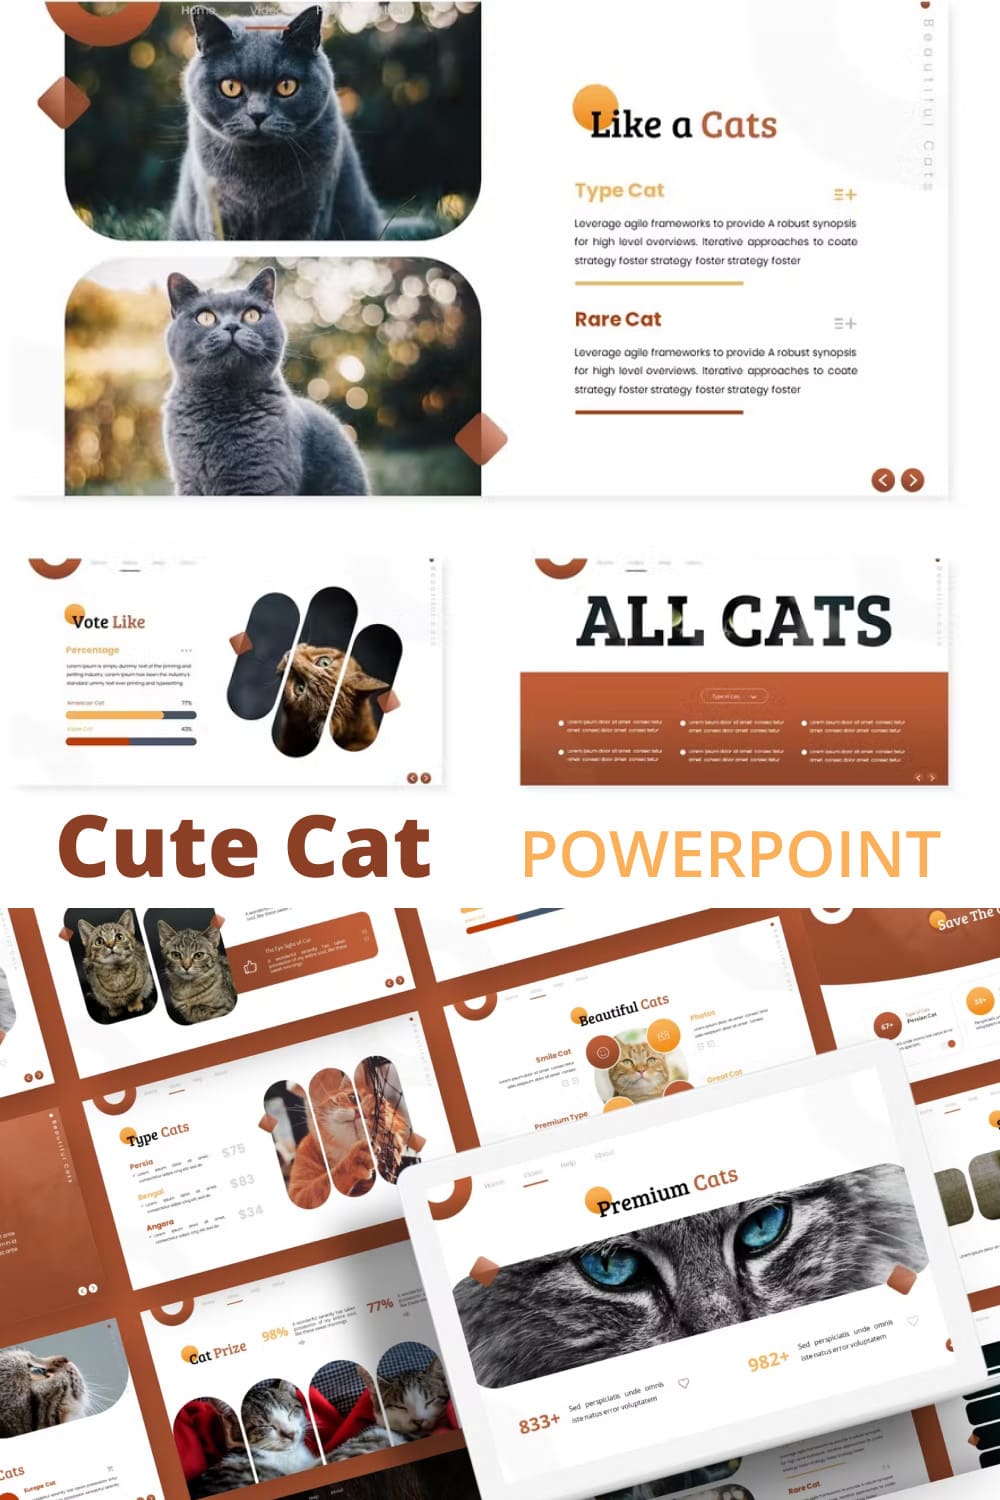 Cute cat powerpoint template - pinterest image preview.